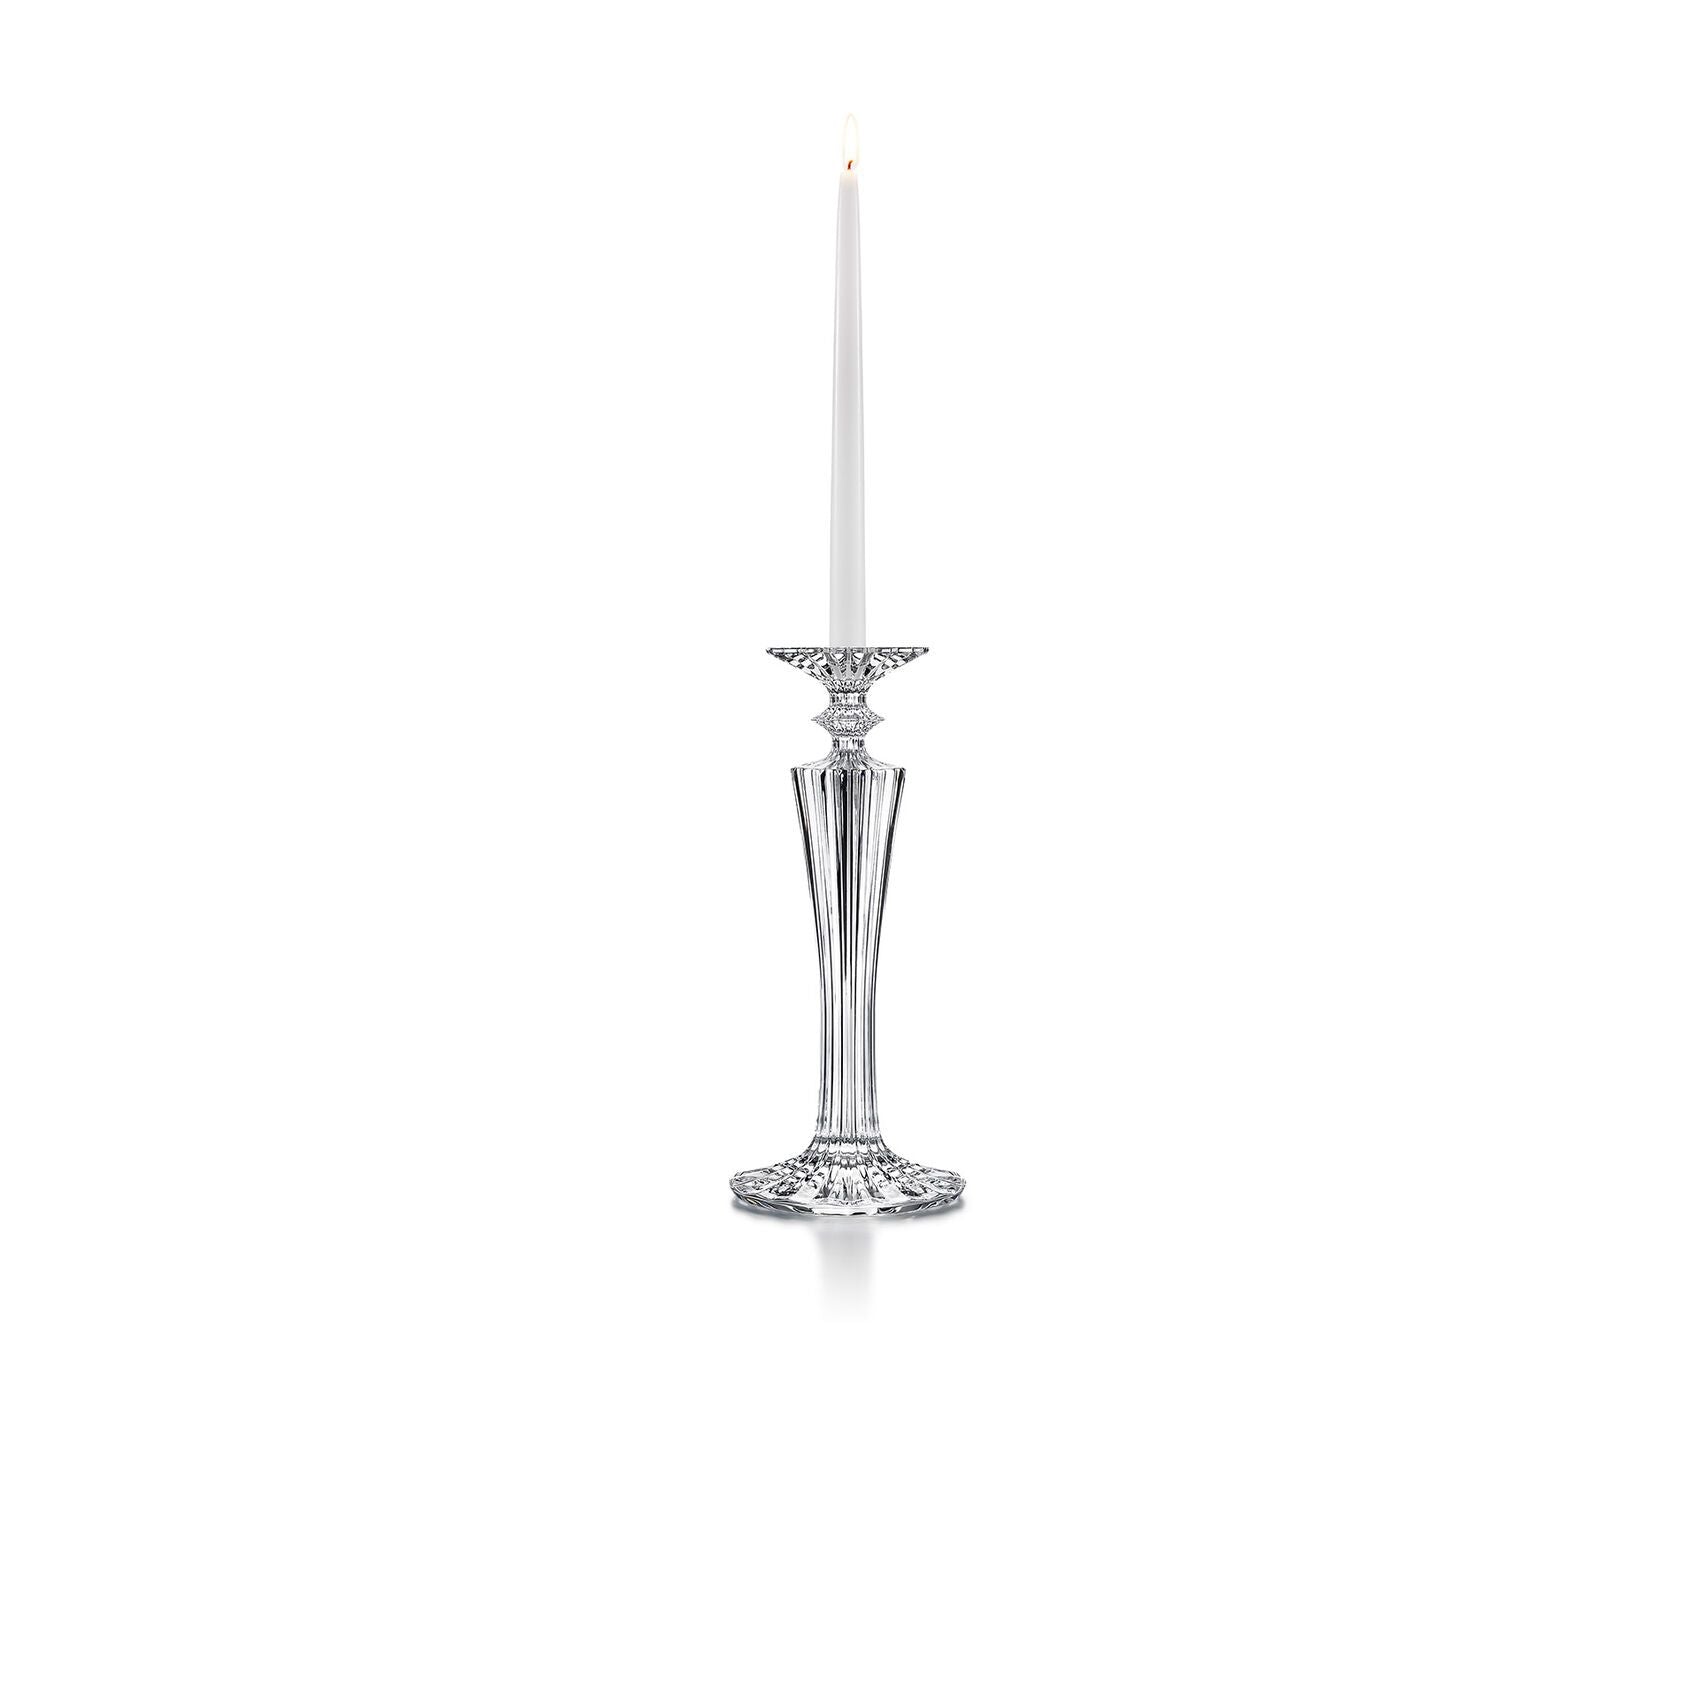 Mille Nuits Candlestick